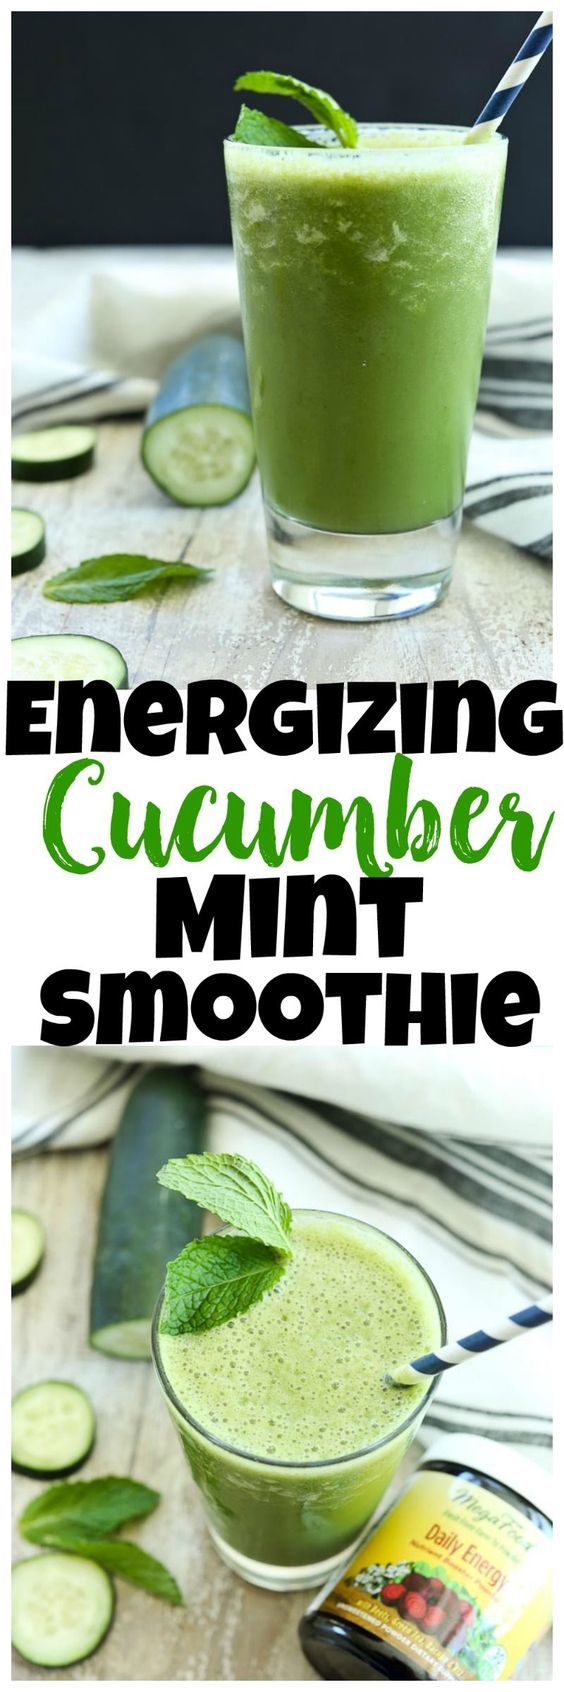 Discover the healthy benefits of green smoothies in this article. Learn how to prepare the best cucumber mint green smoothie that boosts energy. #healthy #health #wellness #nutrition #fitness #nobake #healthyrecipes